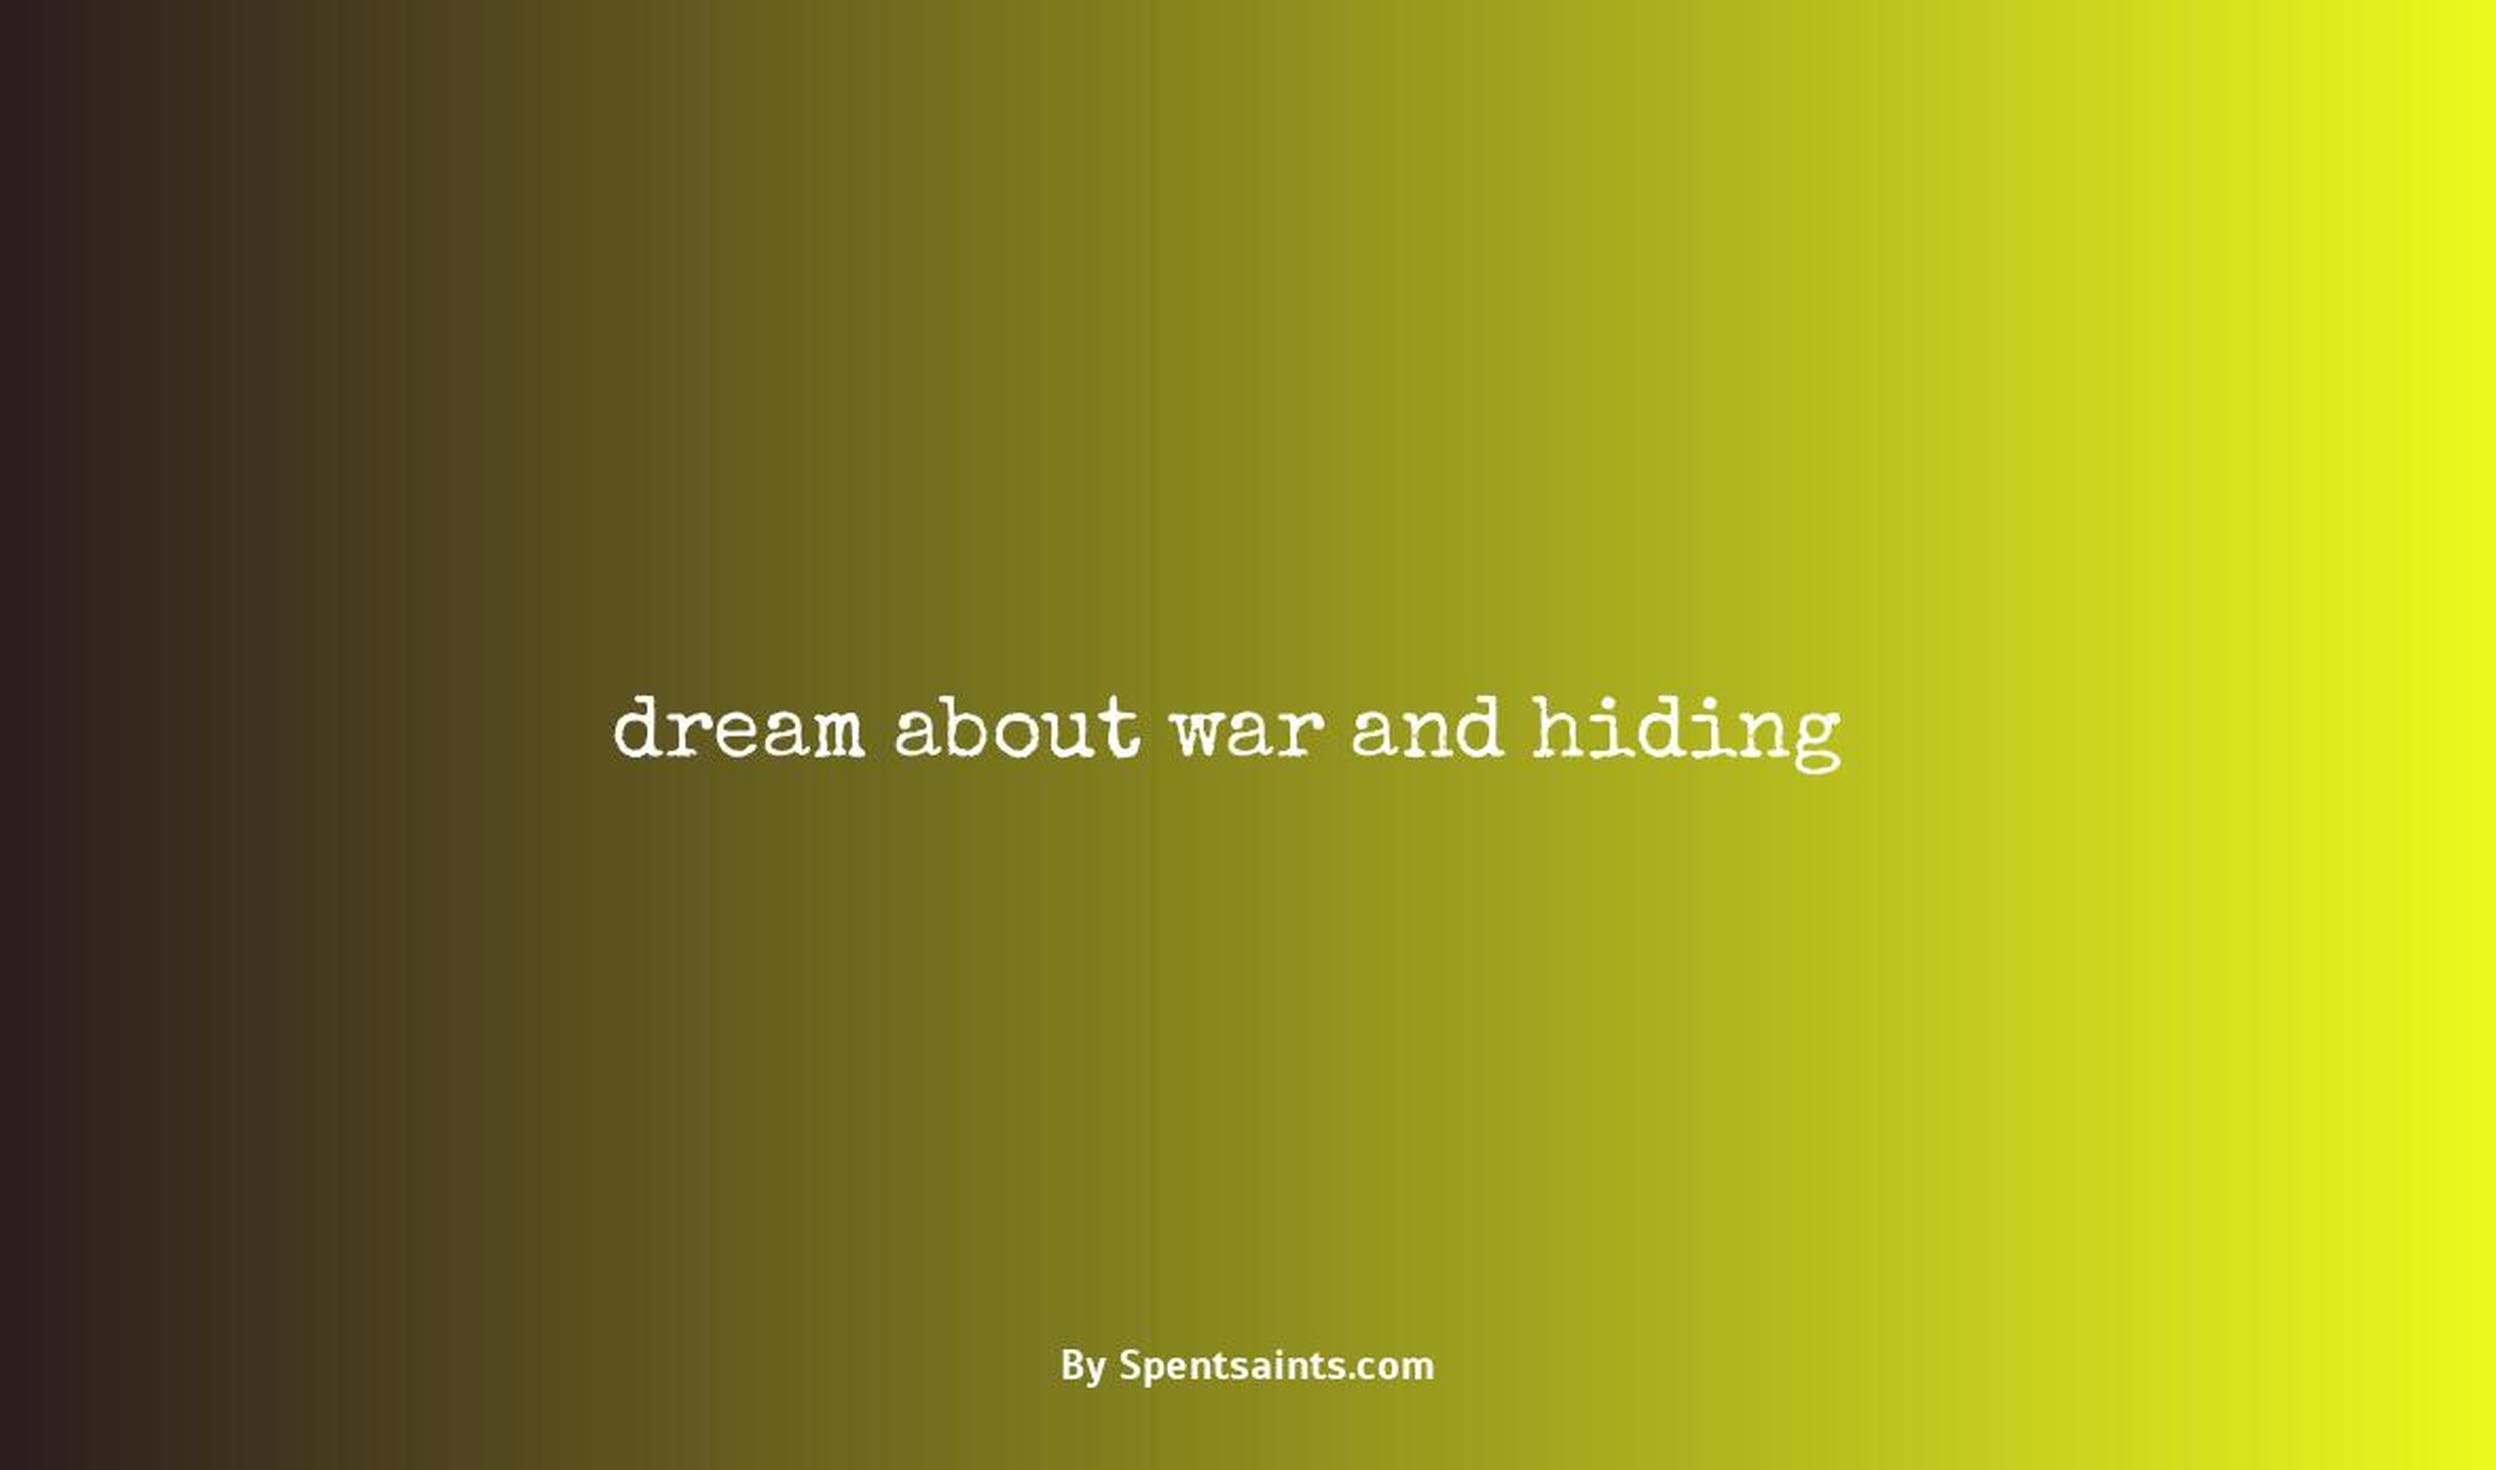 dream about war and hiding